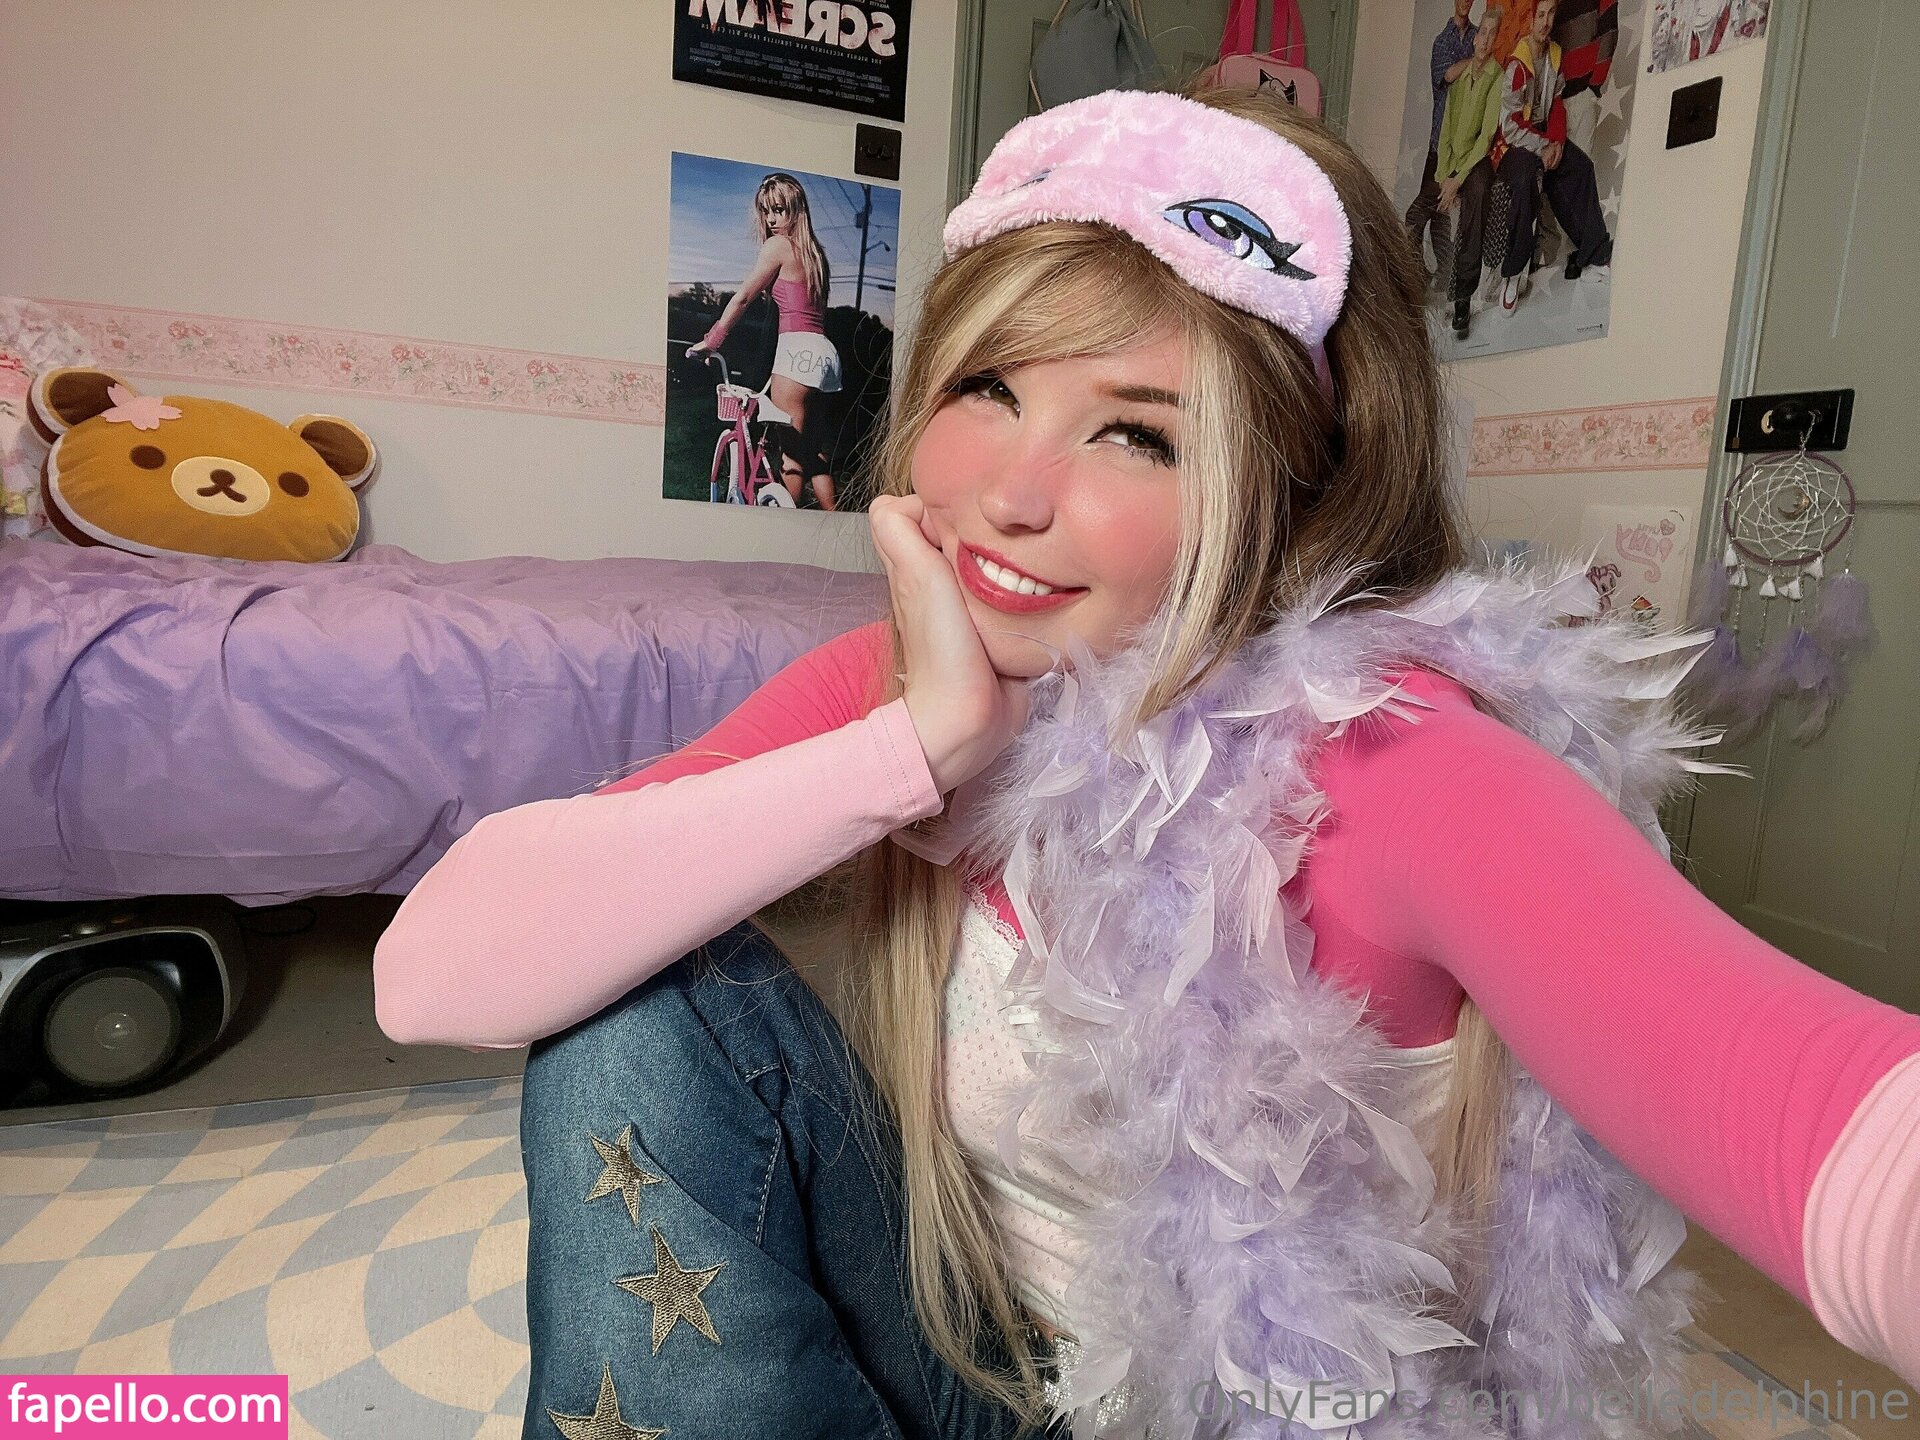 daily mail us twitter belle delphine